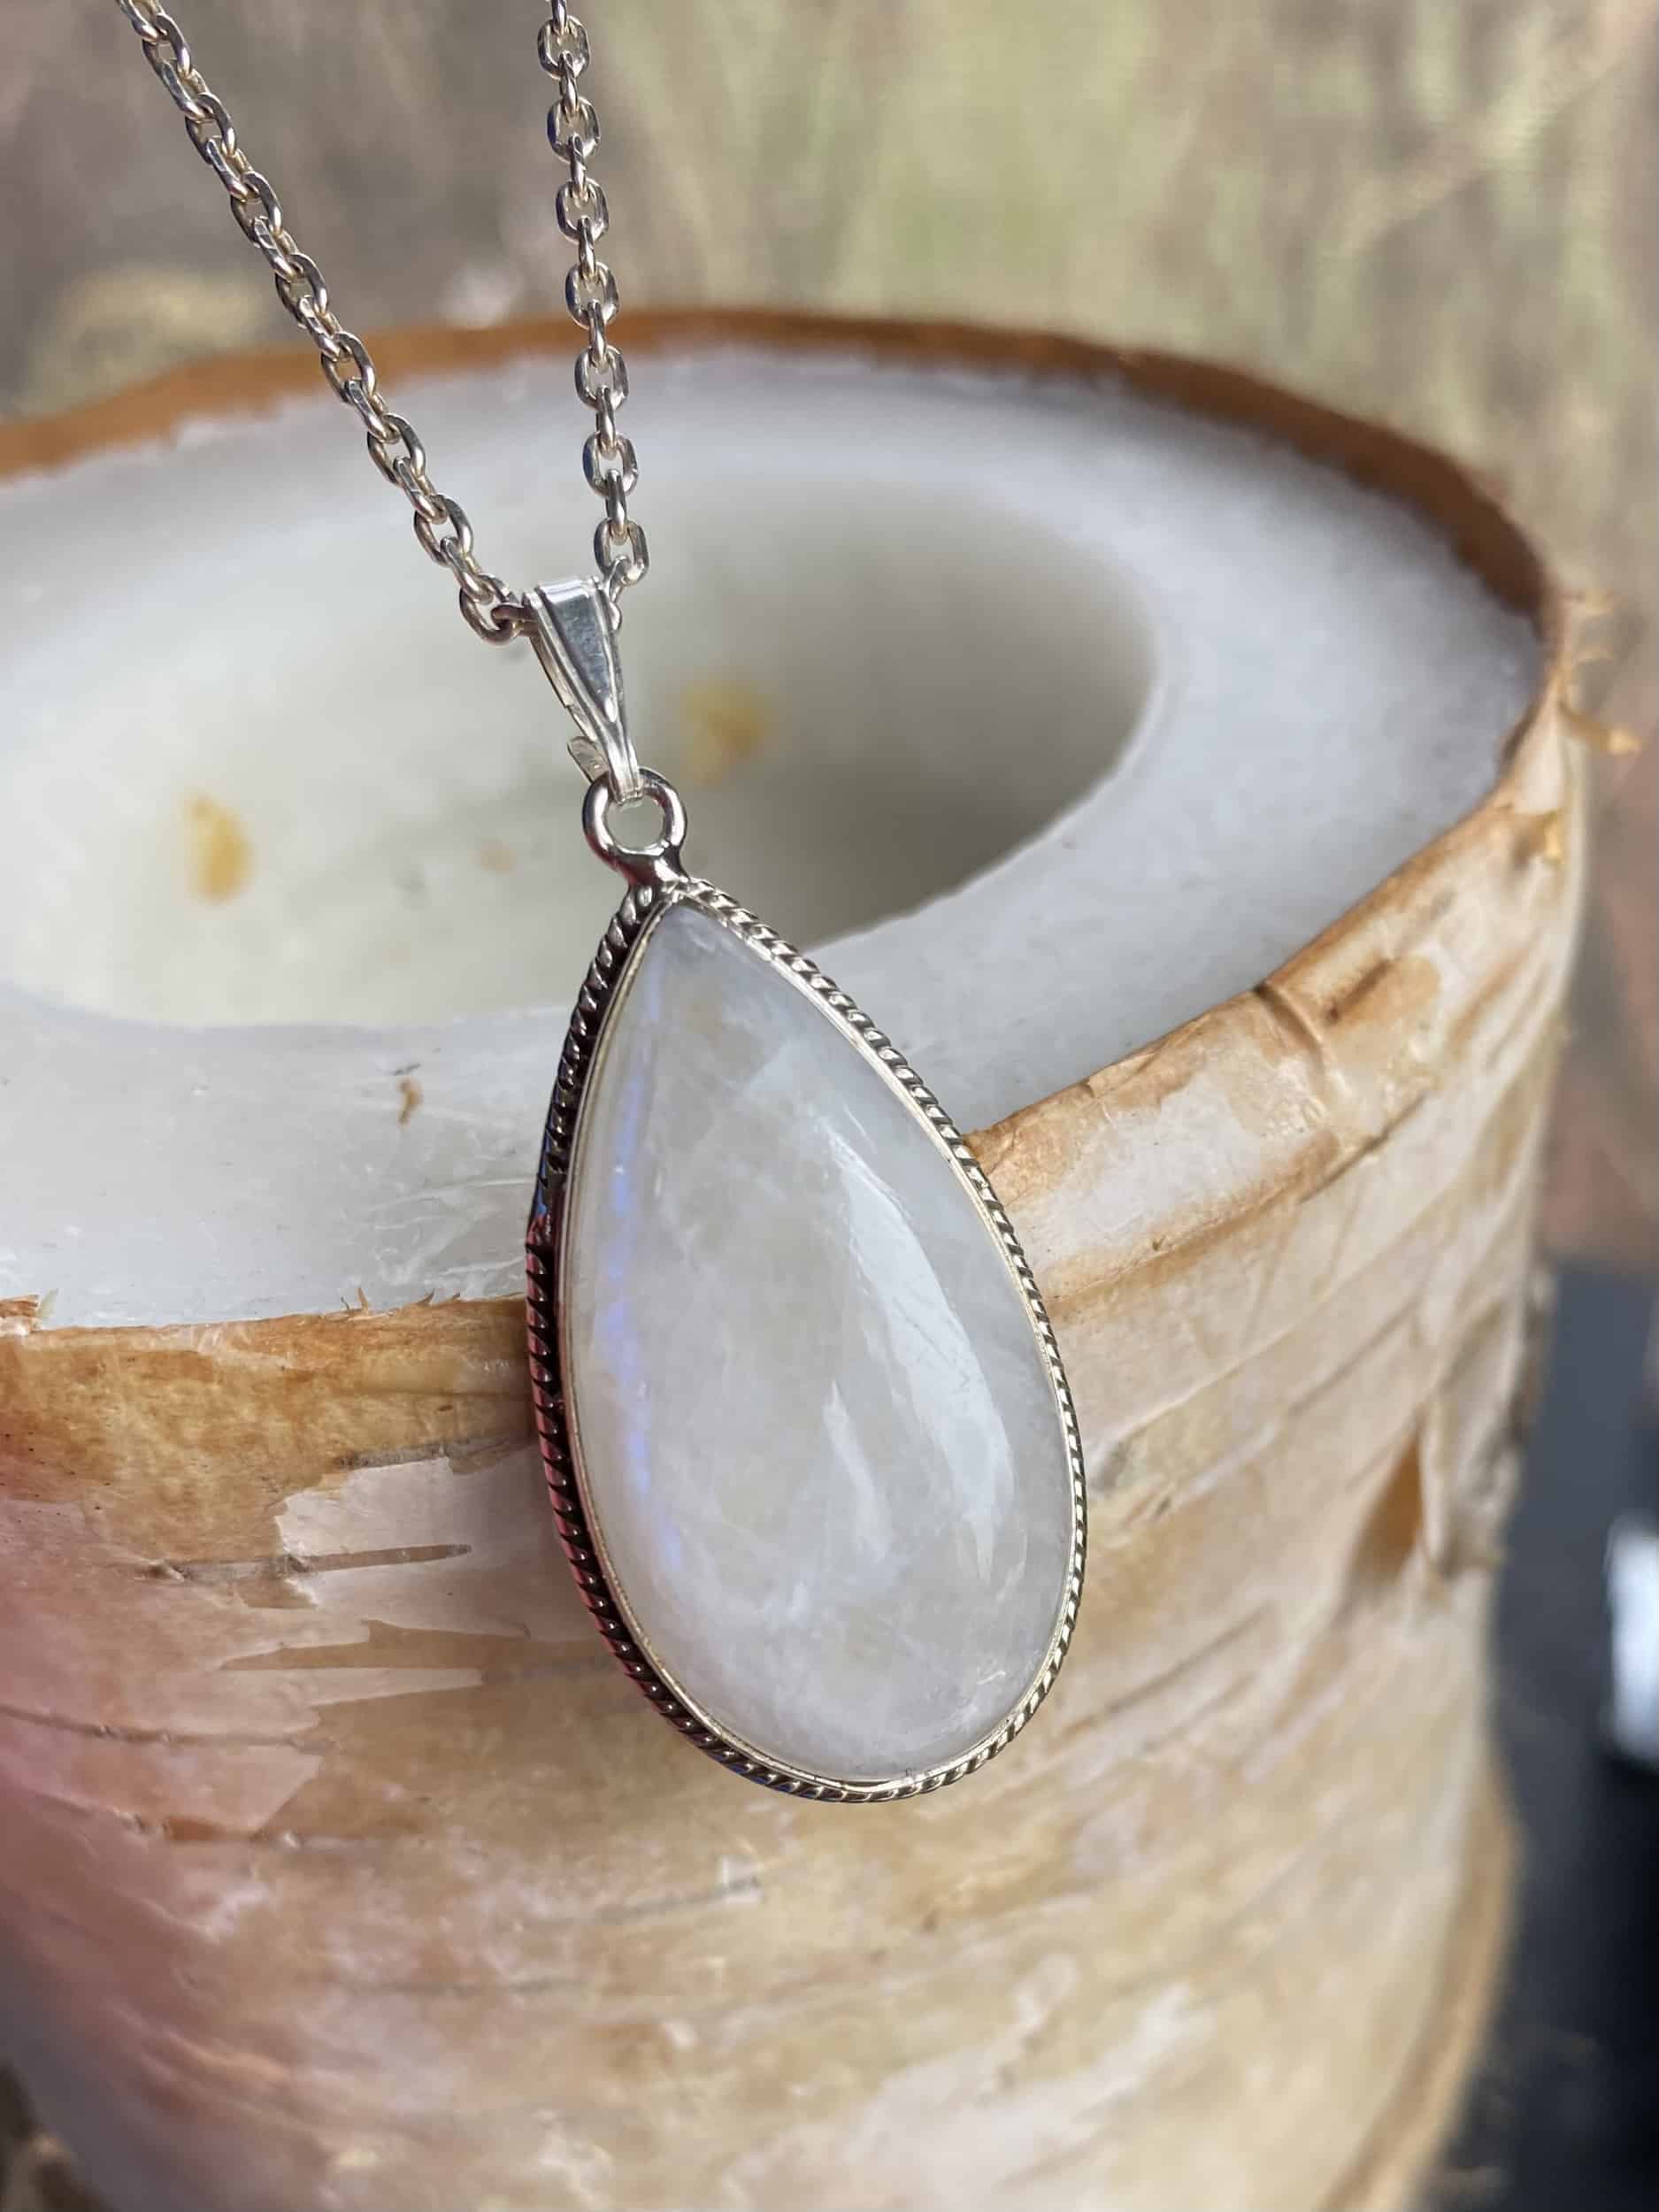 This Moonstone teardrop pendant necklace sterling silver by Earth Karma is made with love by EARTH KARMA! Shop more unique gift ideas today with Spots Initiatives, the best way to support creators.